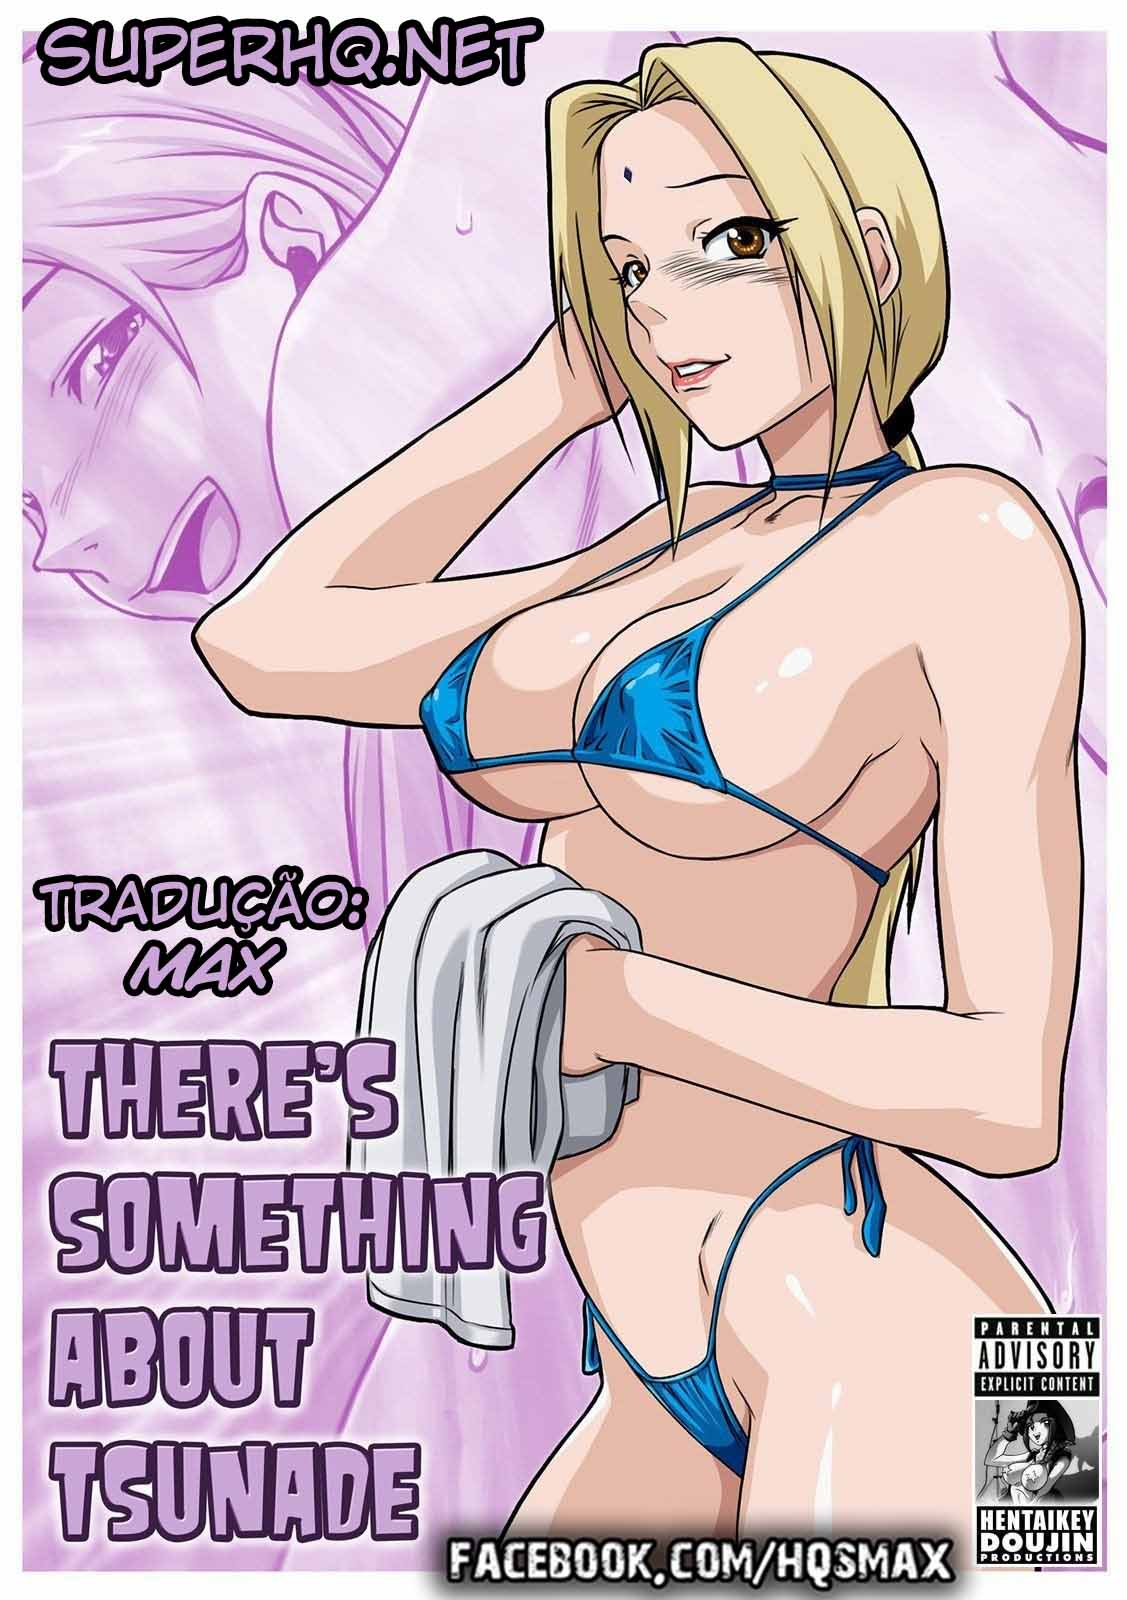 There’s Something About Tsunade - 2